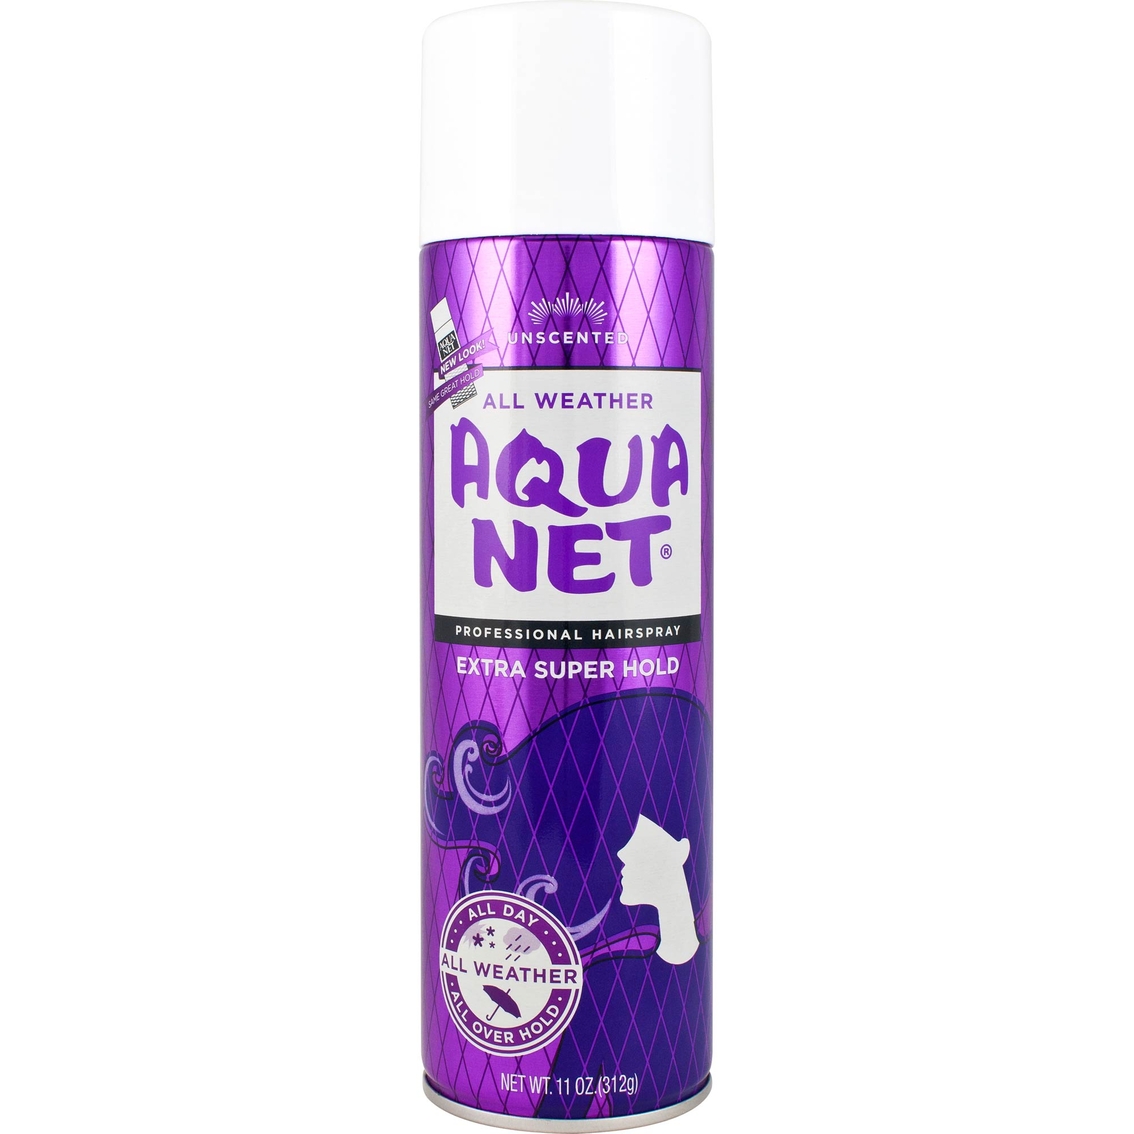  Aqua Net All Weather Professional Hairspray, Extra Super Hold,  Unscented, 11 Oz : Hair Sprays : Beauty & Personal Care